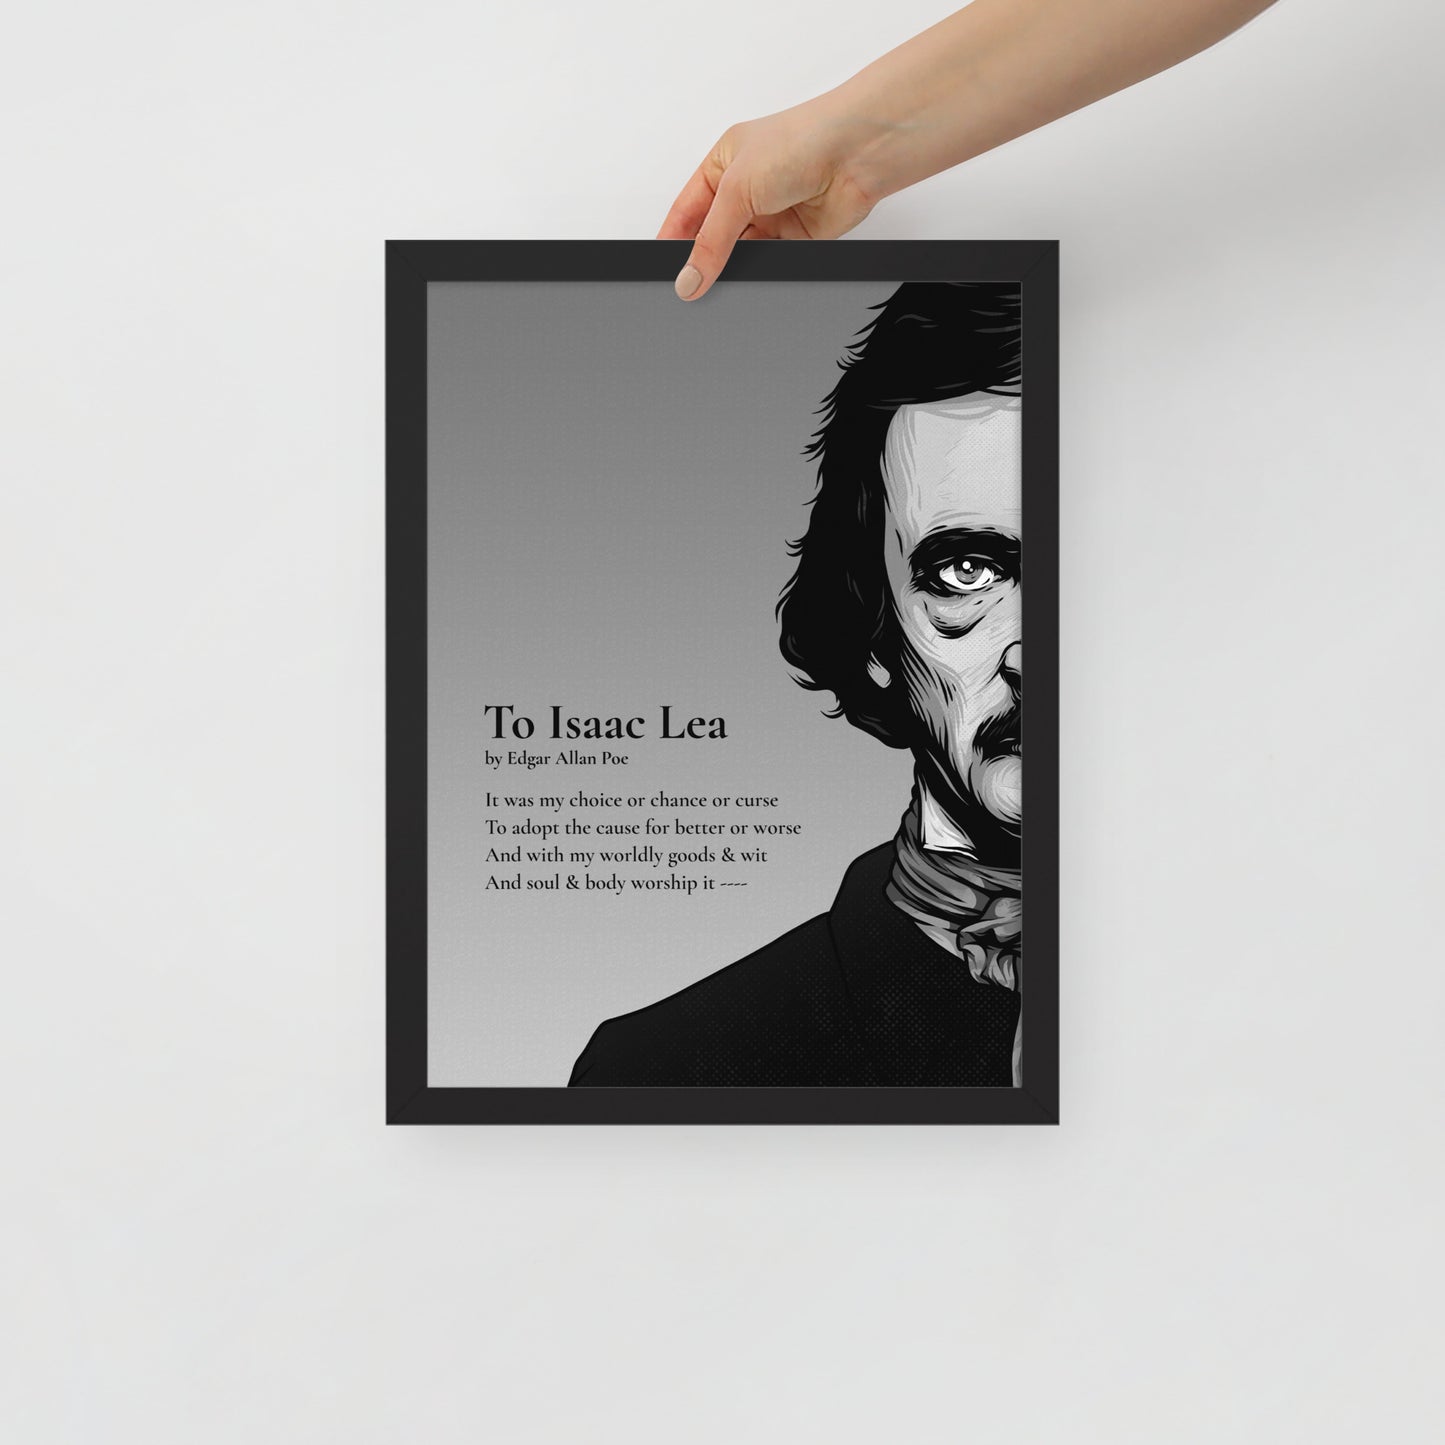 Edgar Allan Poe's 'To Isaac Lea' Framed Matted Poster - 12 x 16 Black Frame